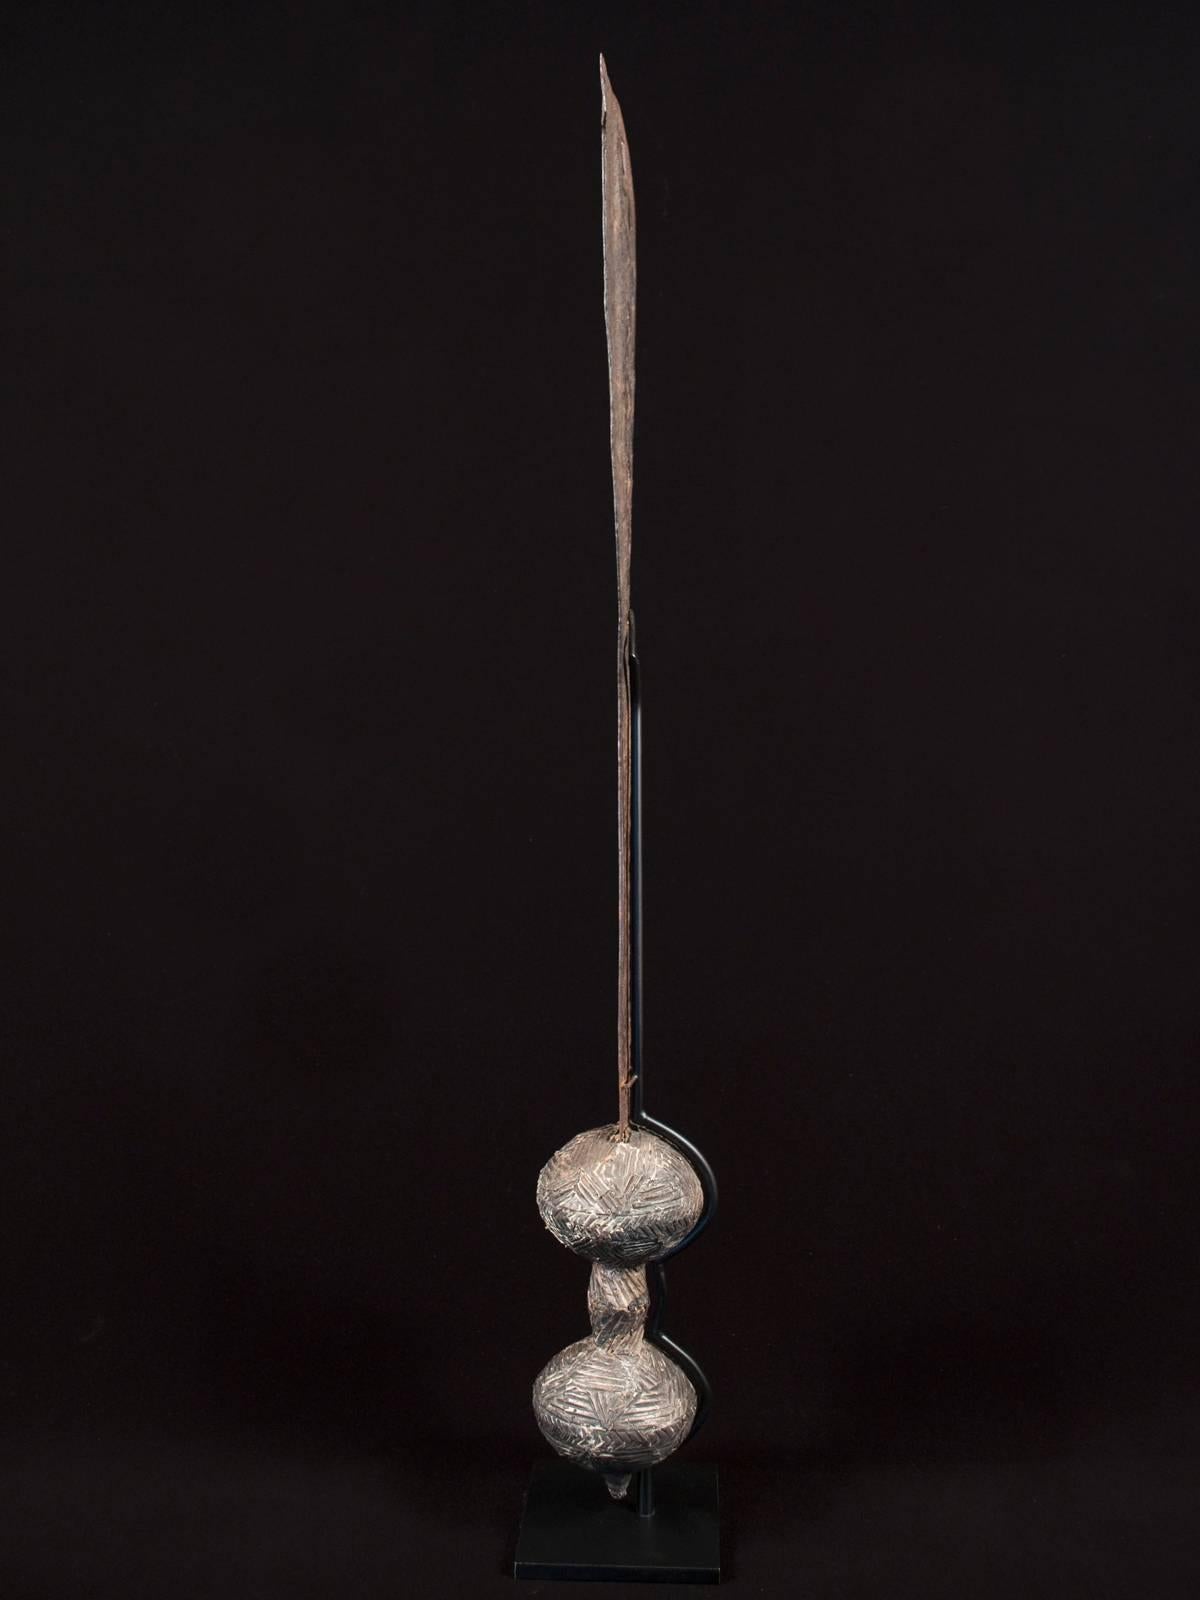 Carved Late 19th-Early 20th Century Tribal Ritual Scepter, Ashanti People of Ghana